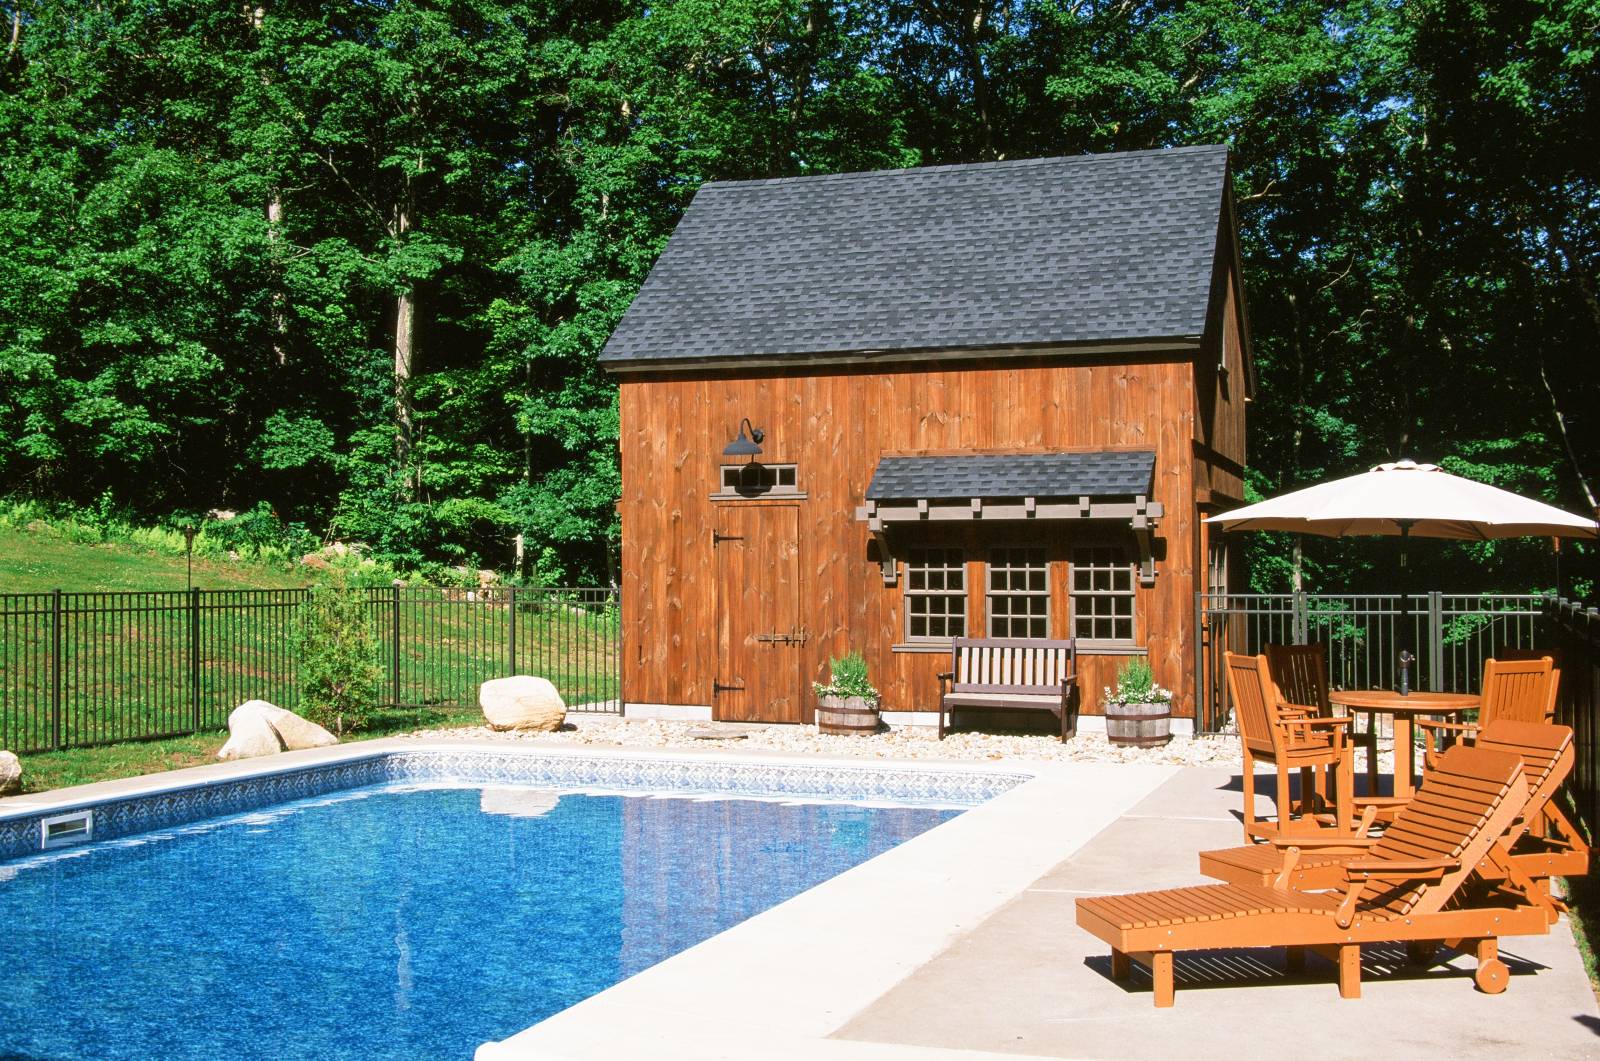 Pool in front of the barn • Also poly furniture from The Barn Yard